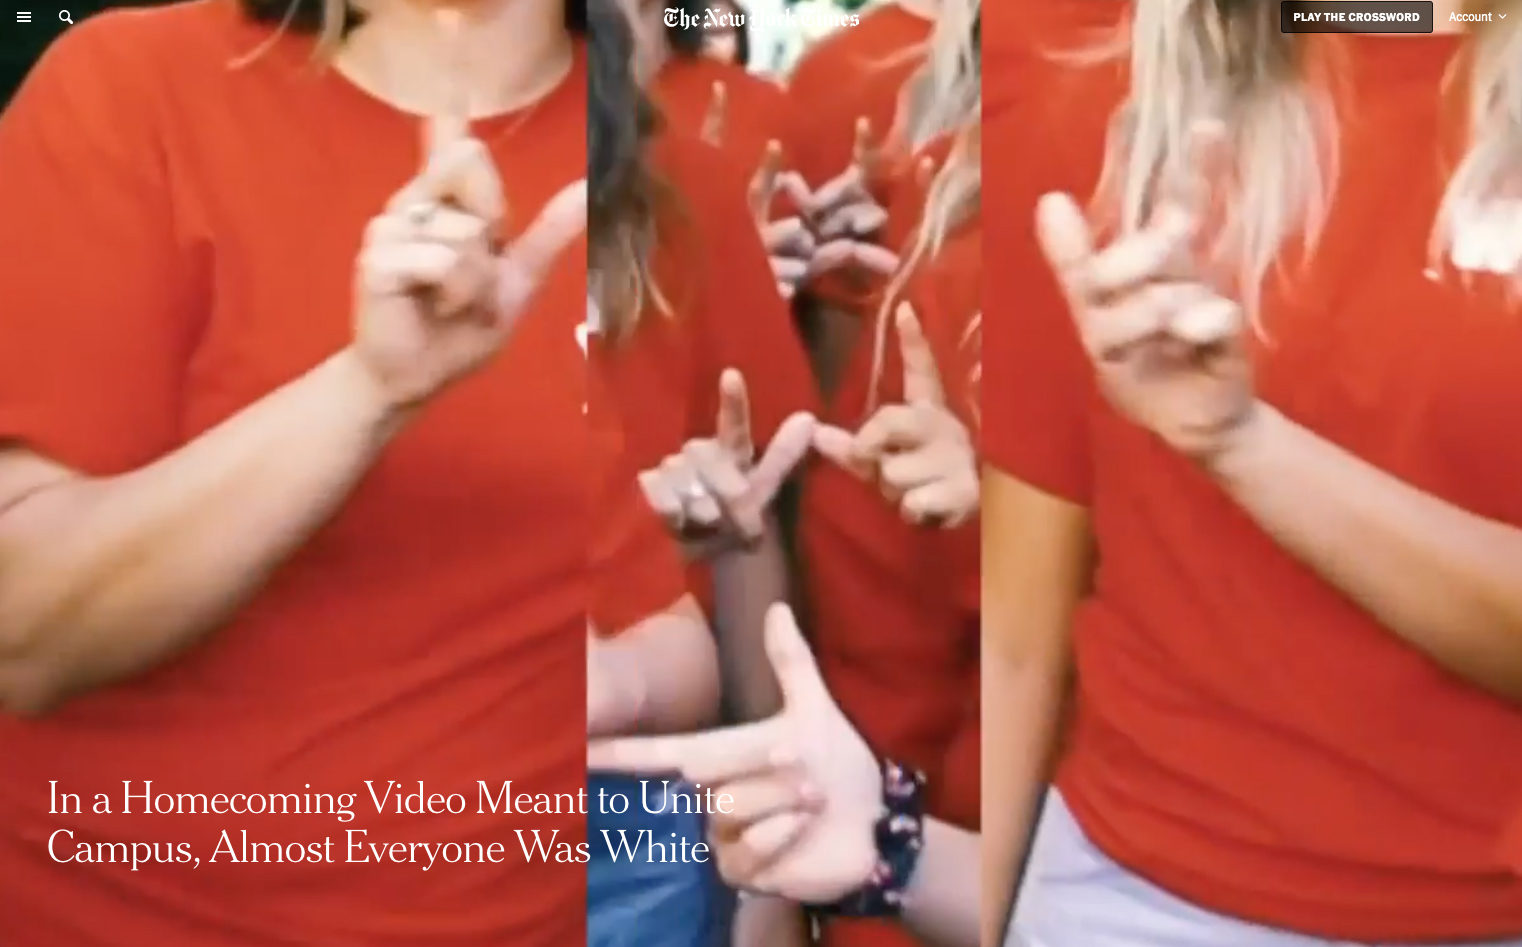 In a Homecoming Video Meant to Unite Campus, Almost Everyone Was White